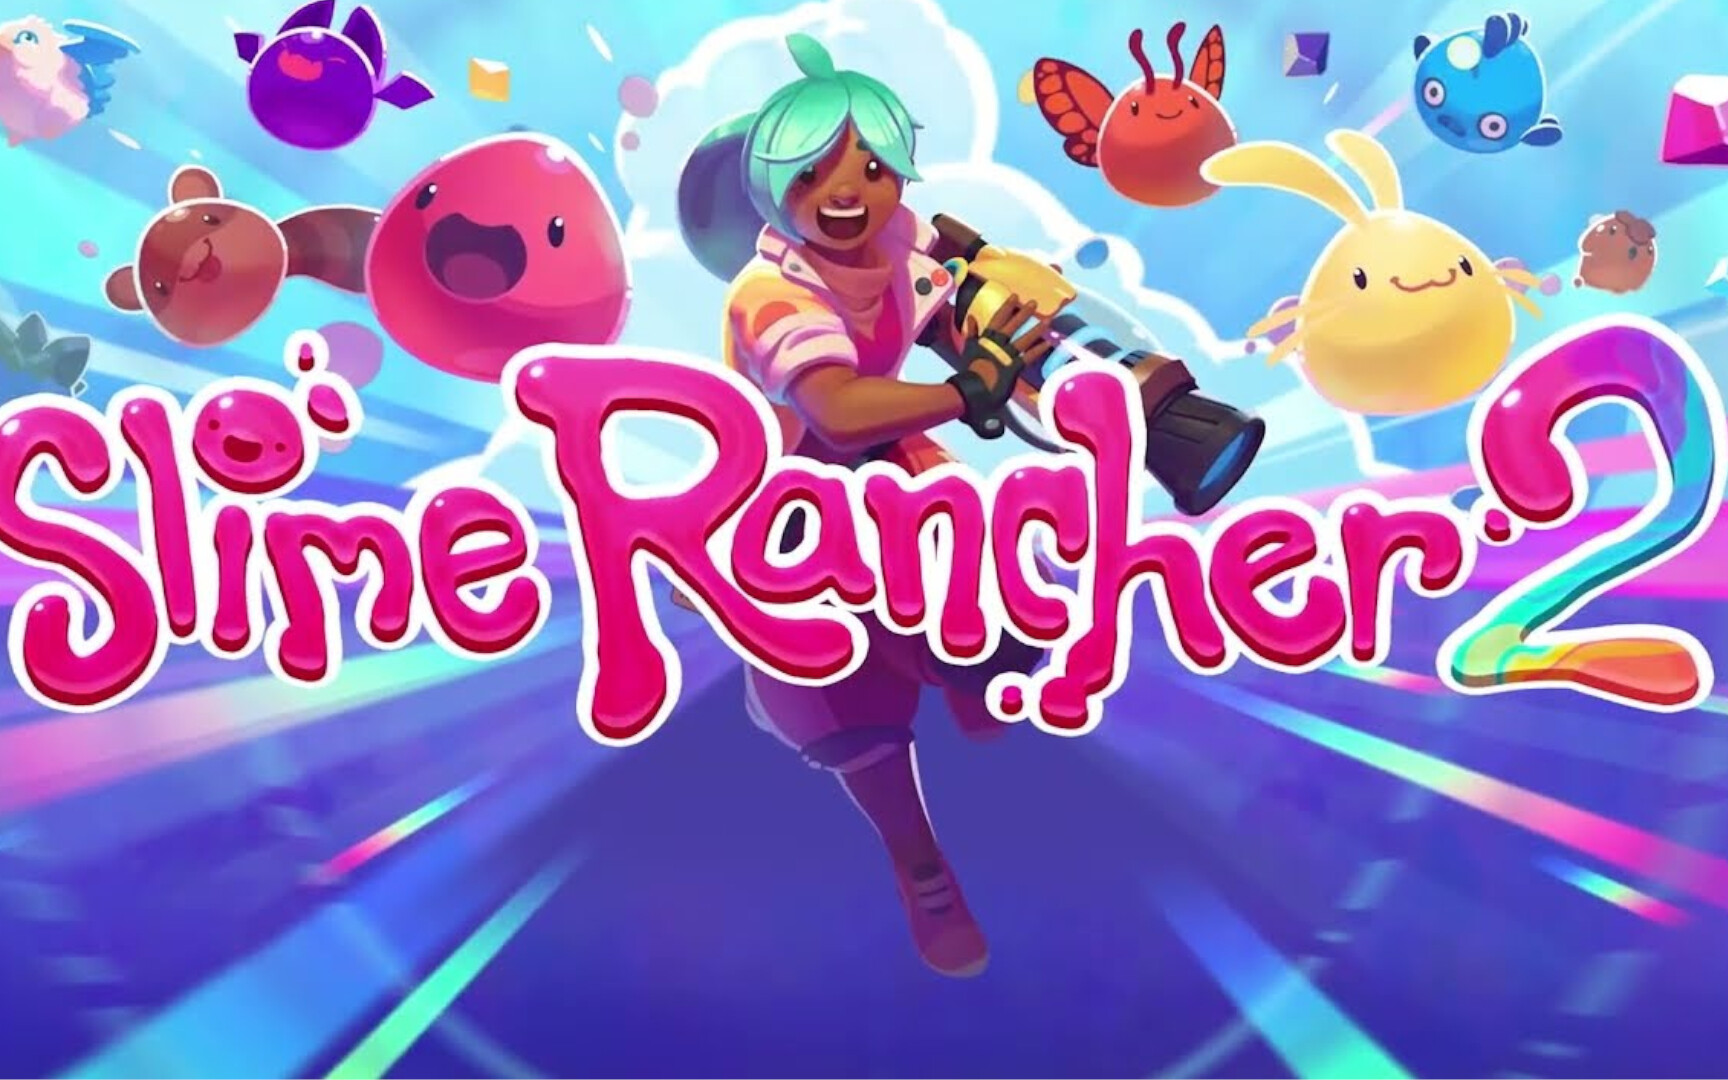 Slime Rancher 2 on PS5